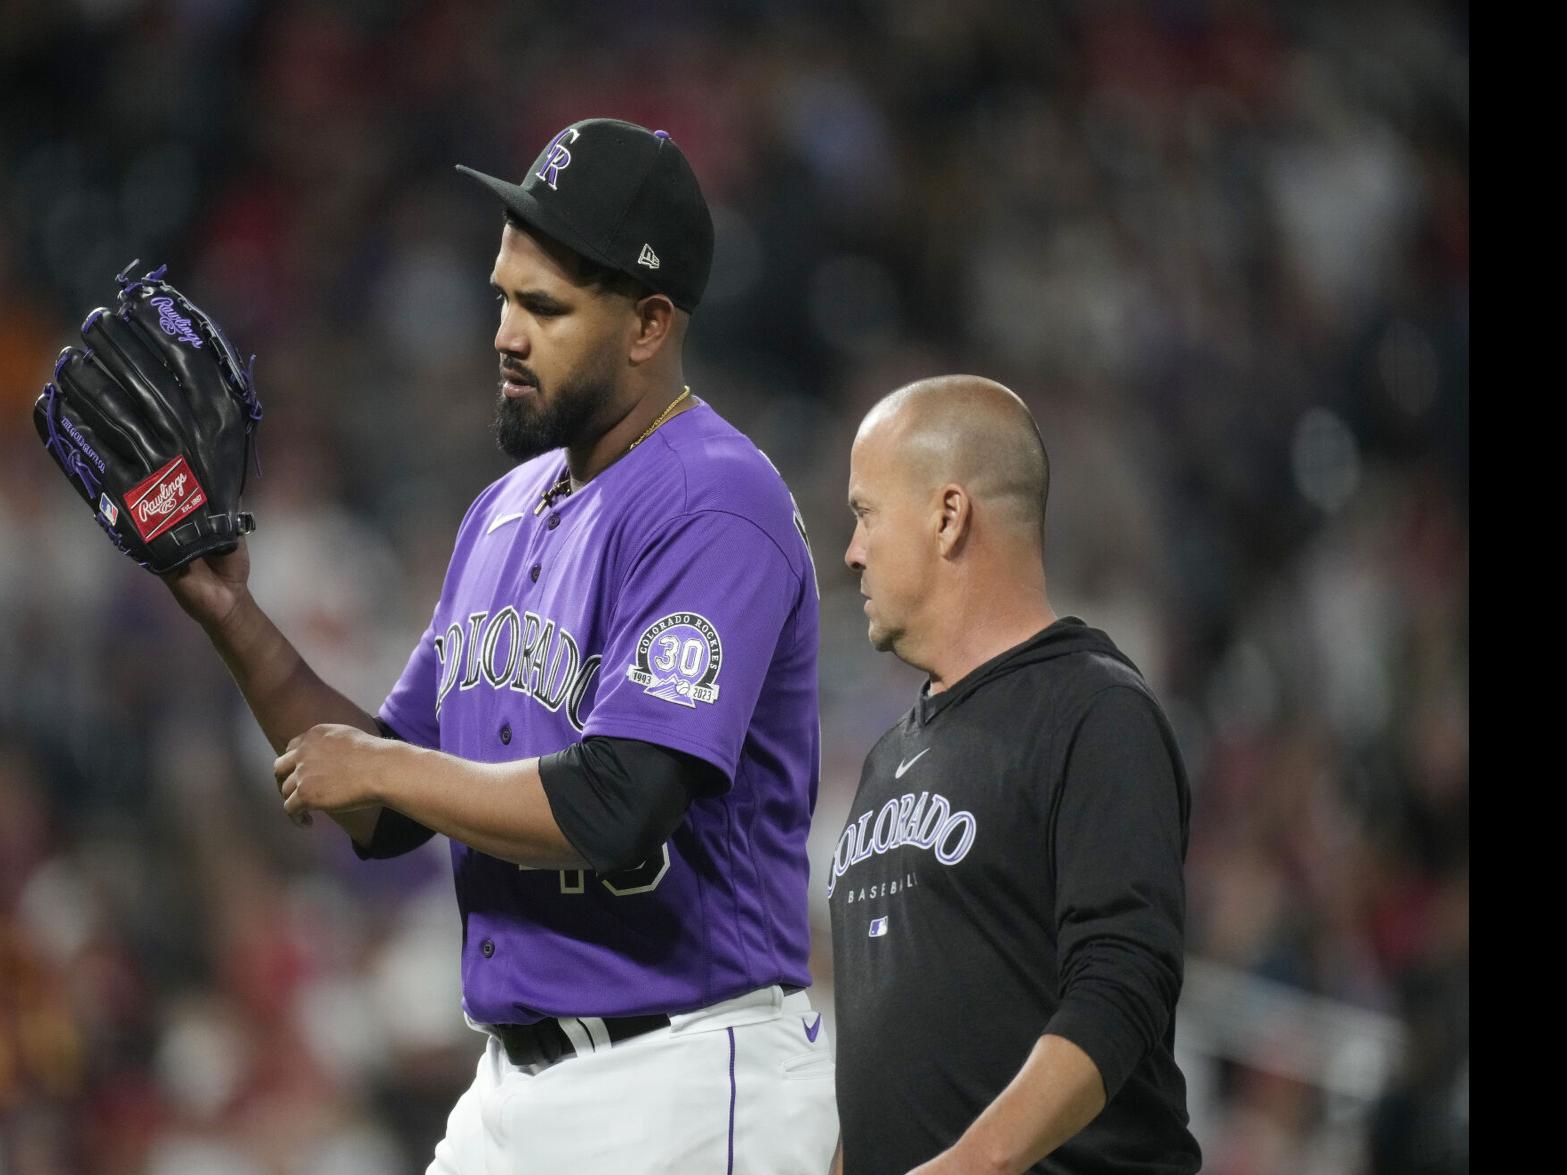 Gomber shuts down former team, pitches Rockies past Cardinals 1-0